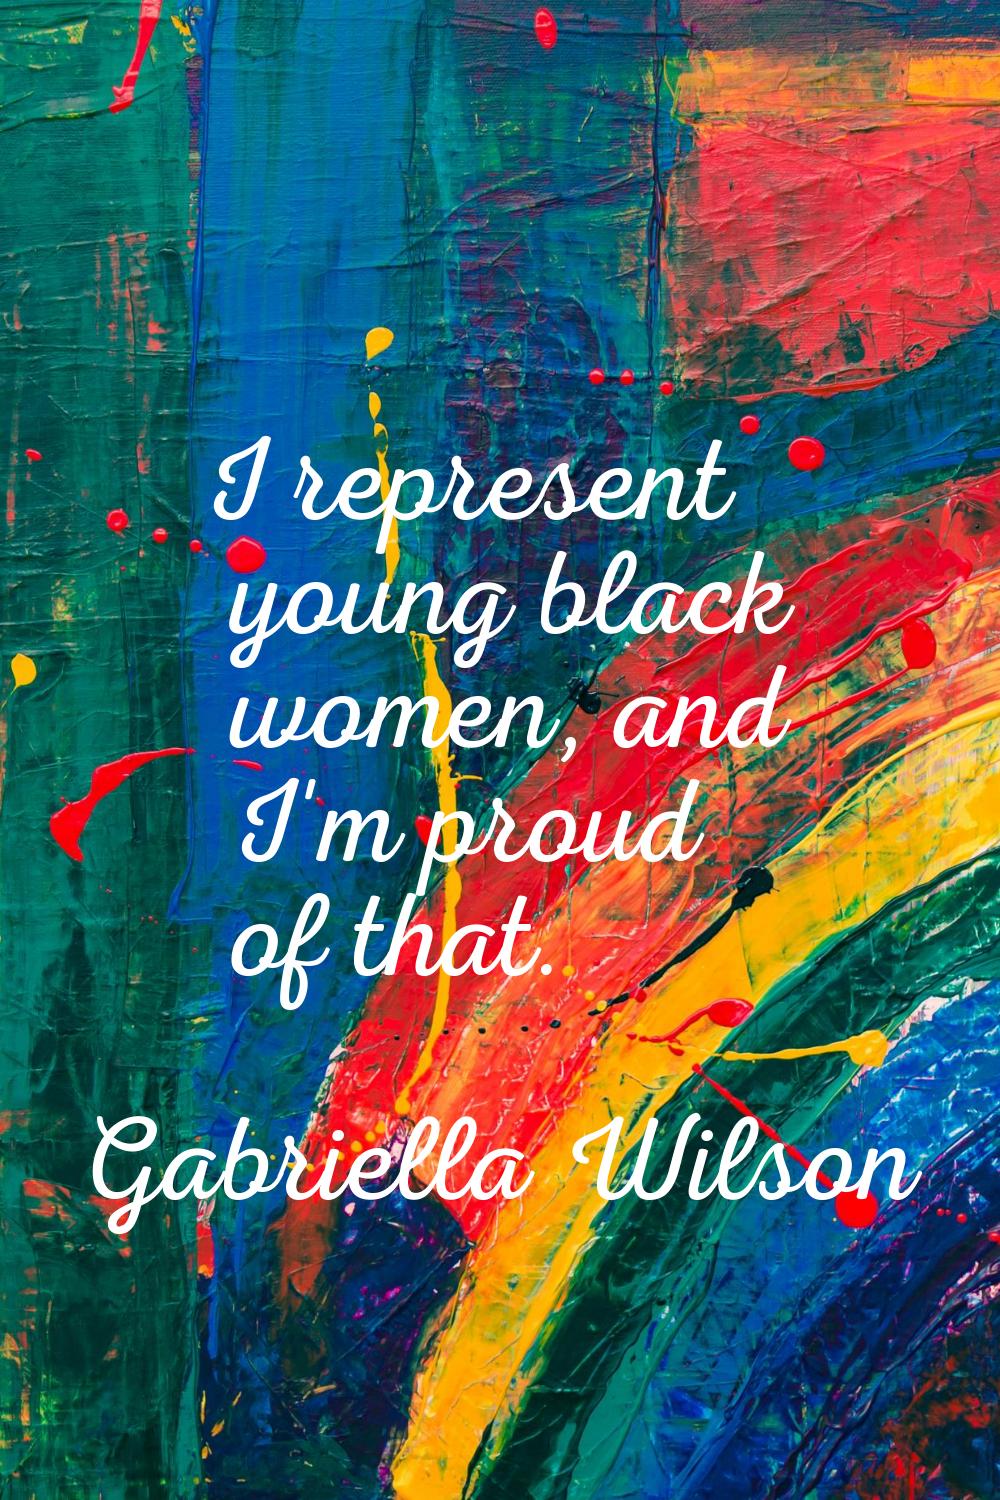 I represent young black women, and I'm proud of that.